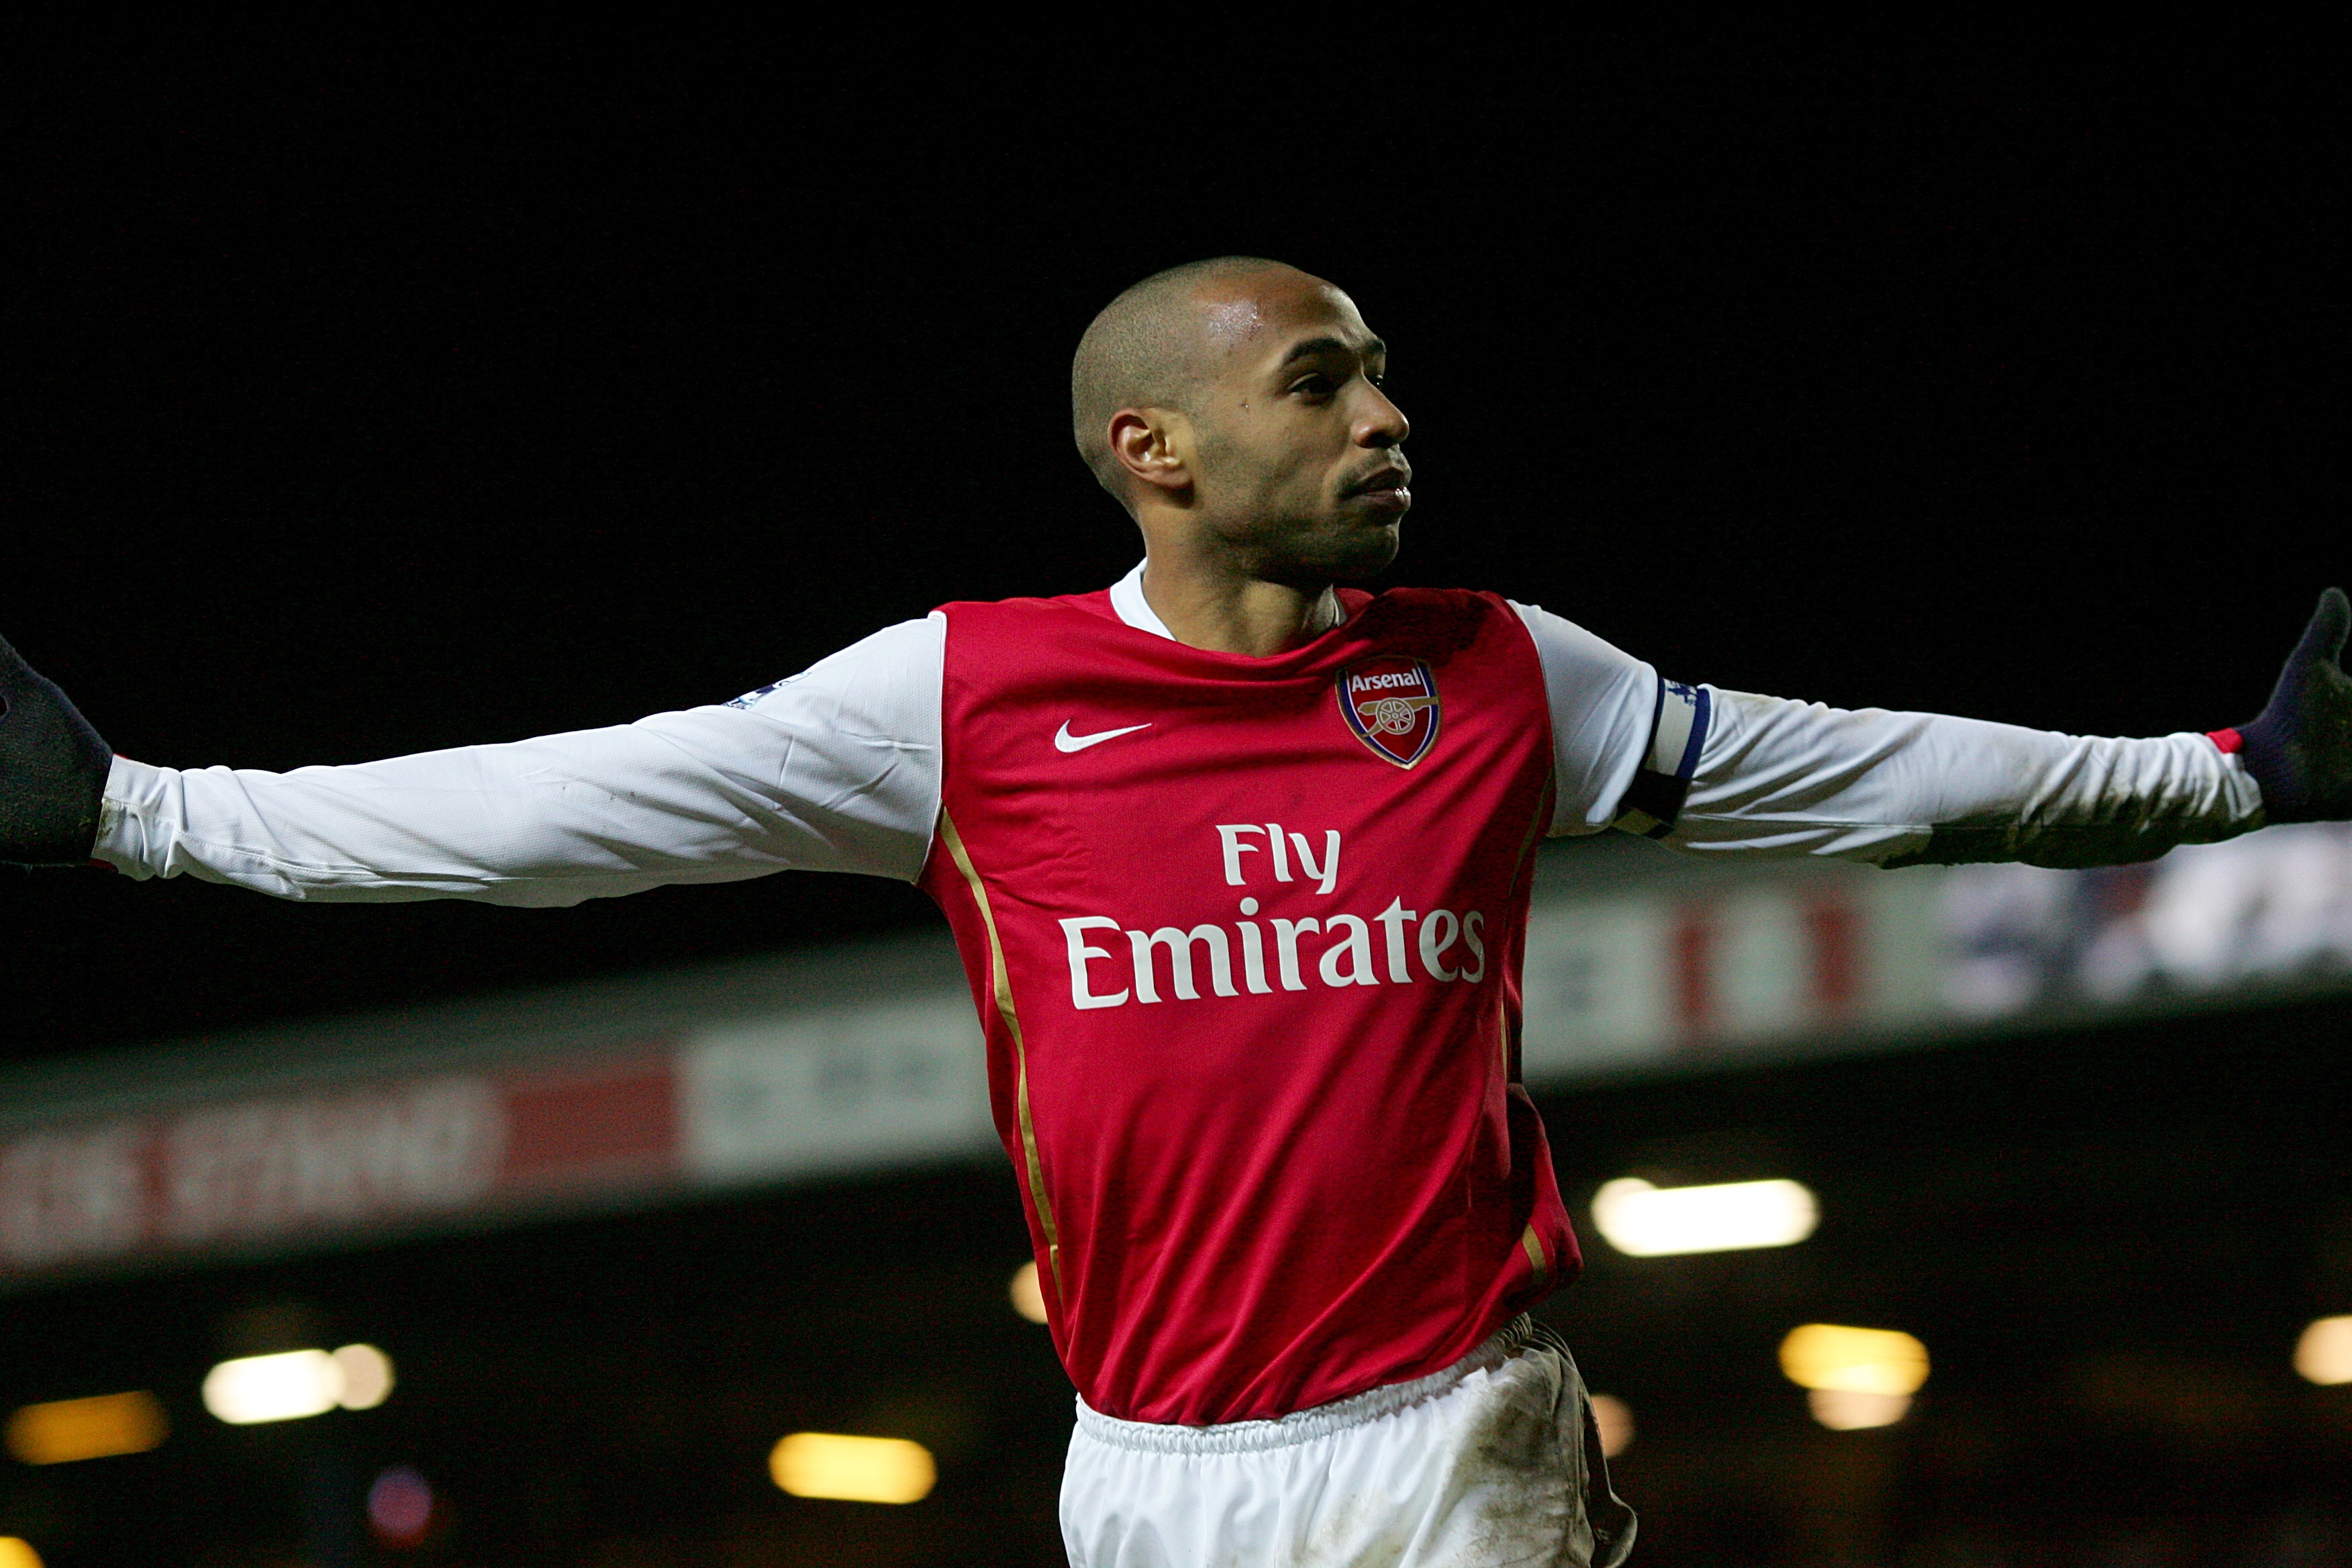 Thierry Henry celebrates after scoring for Arsenal against Blackburn